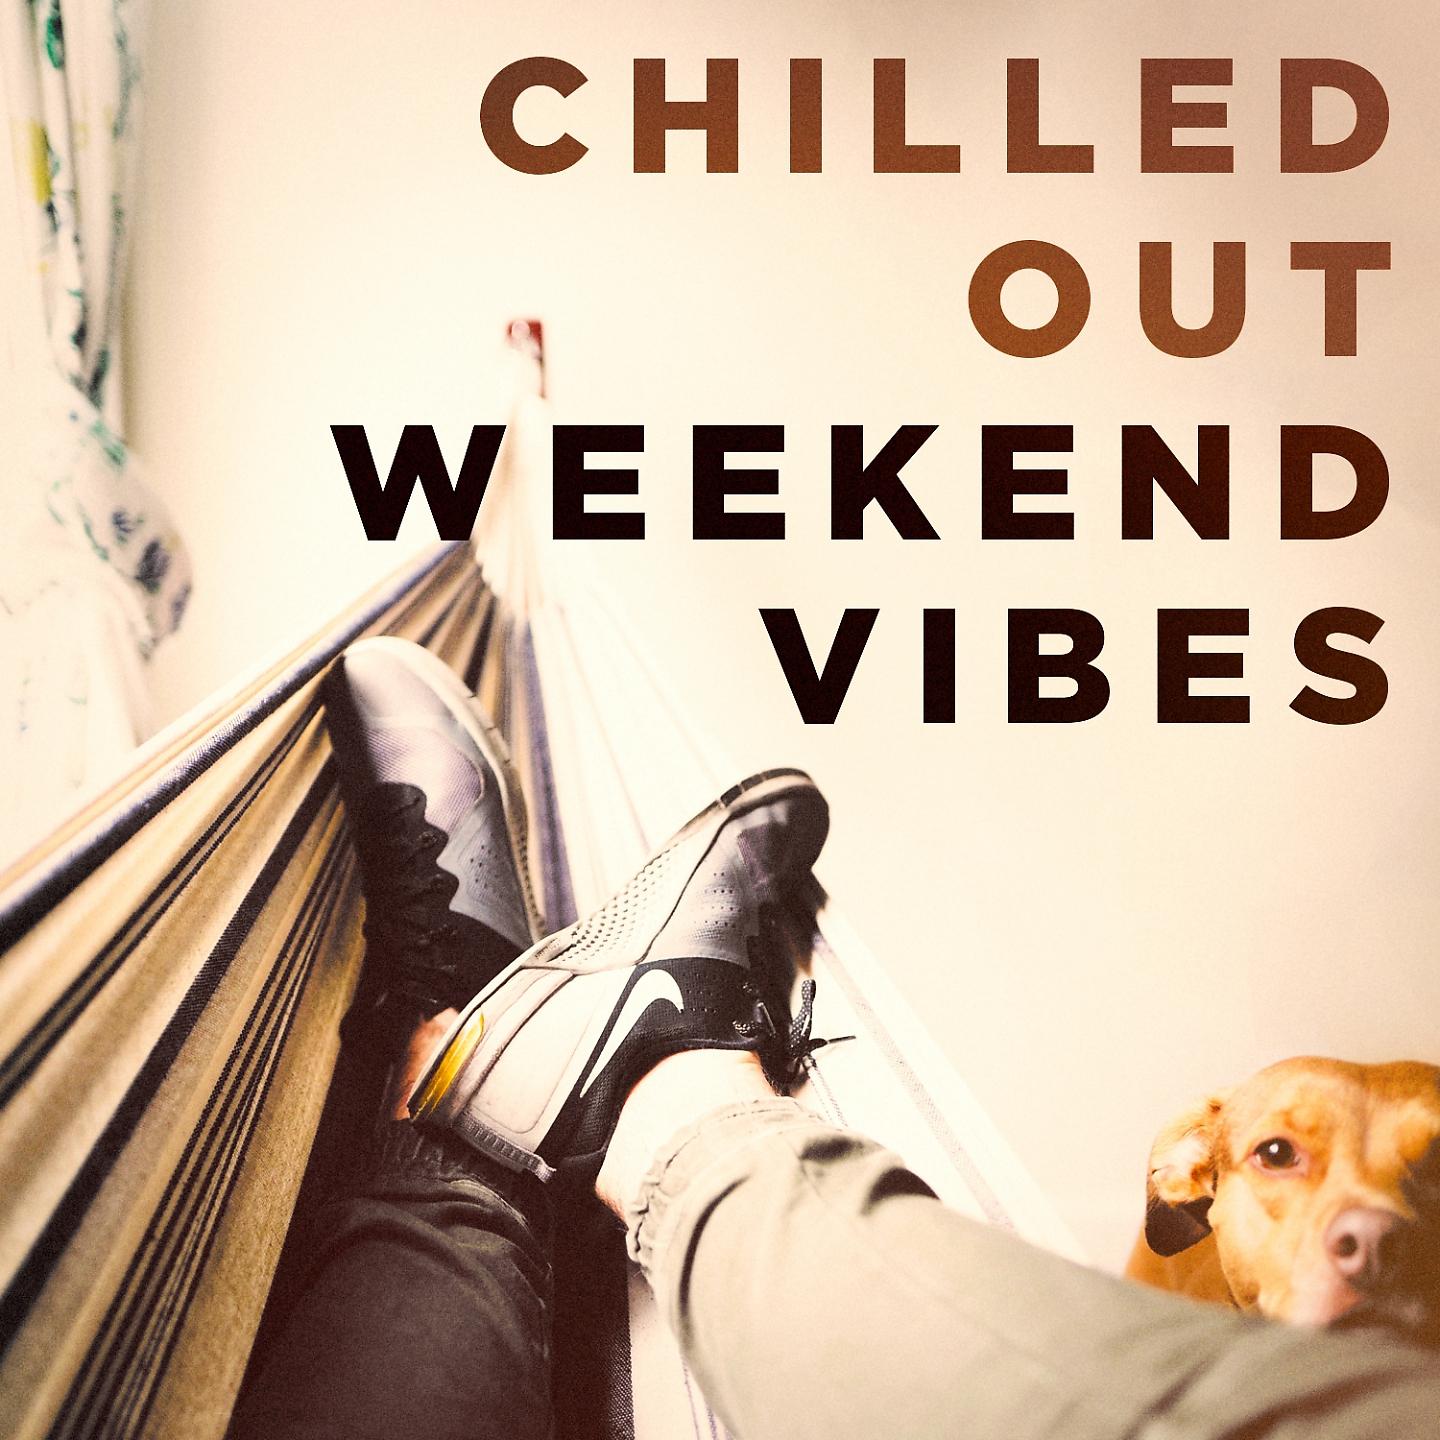 Weekend Vibe Jubël. Weekend Chill. Chilled out. Polpur Vibe weekend. Go out on weekends